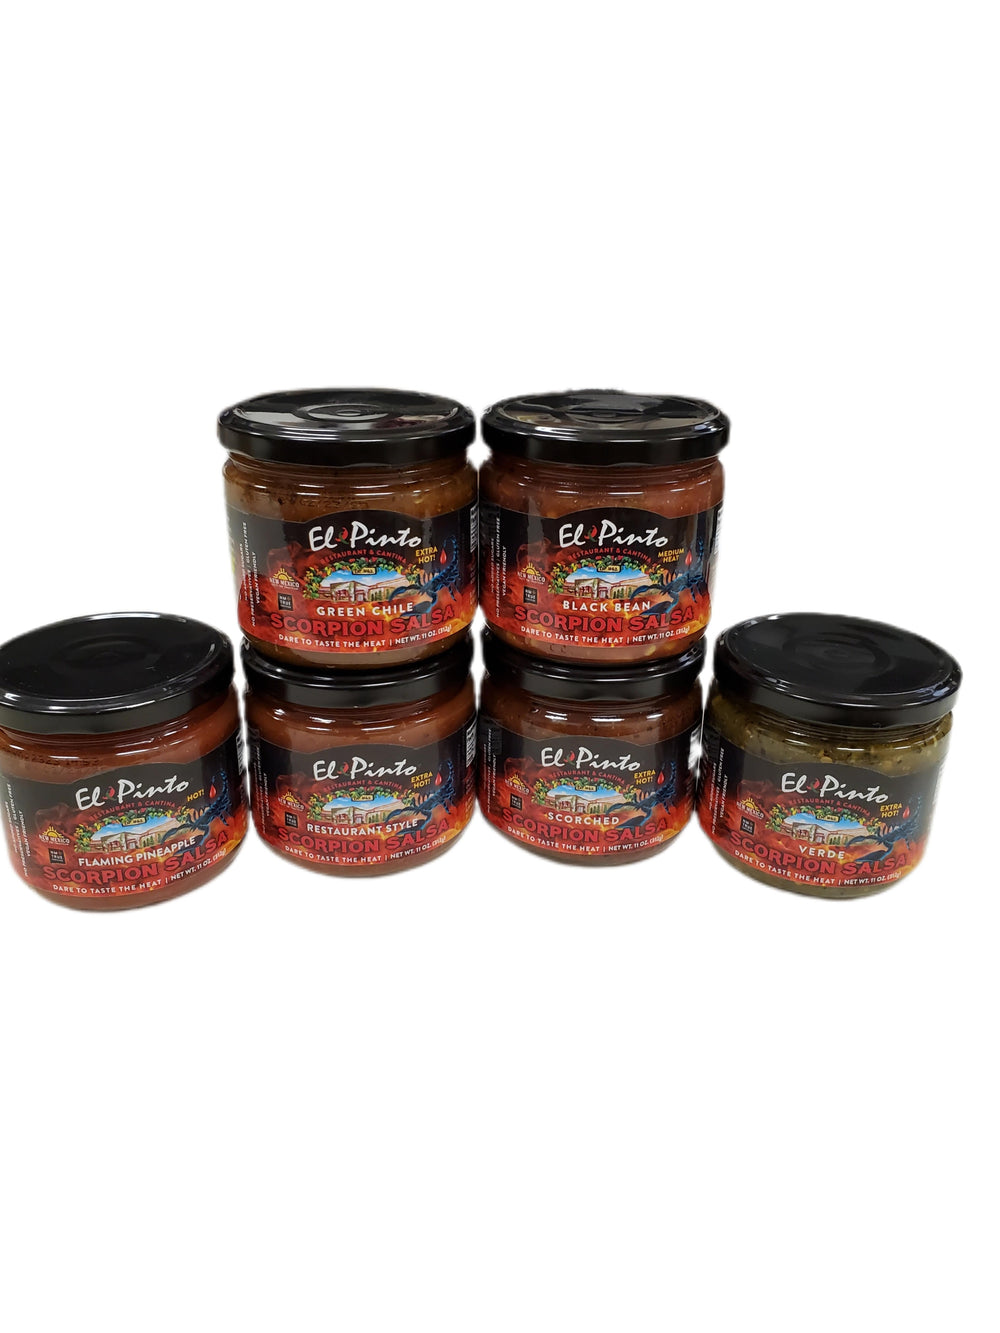 Scorchin' Extra Hot Monthly-#1 Ranked New Mexico Salsa &amp; Chile Powder | Made in New Mexico